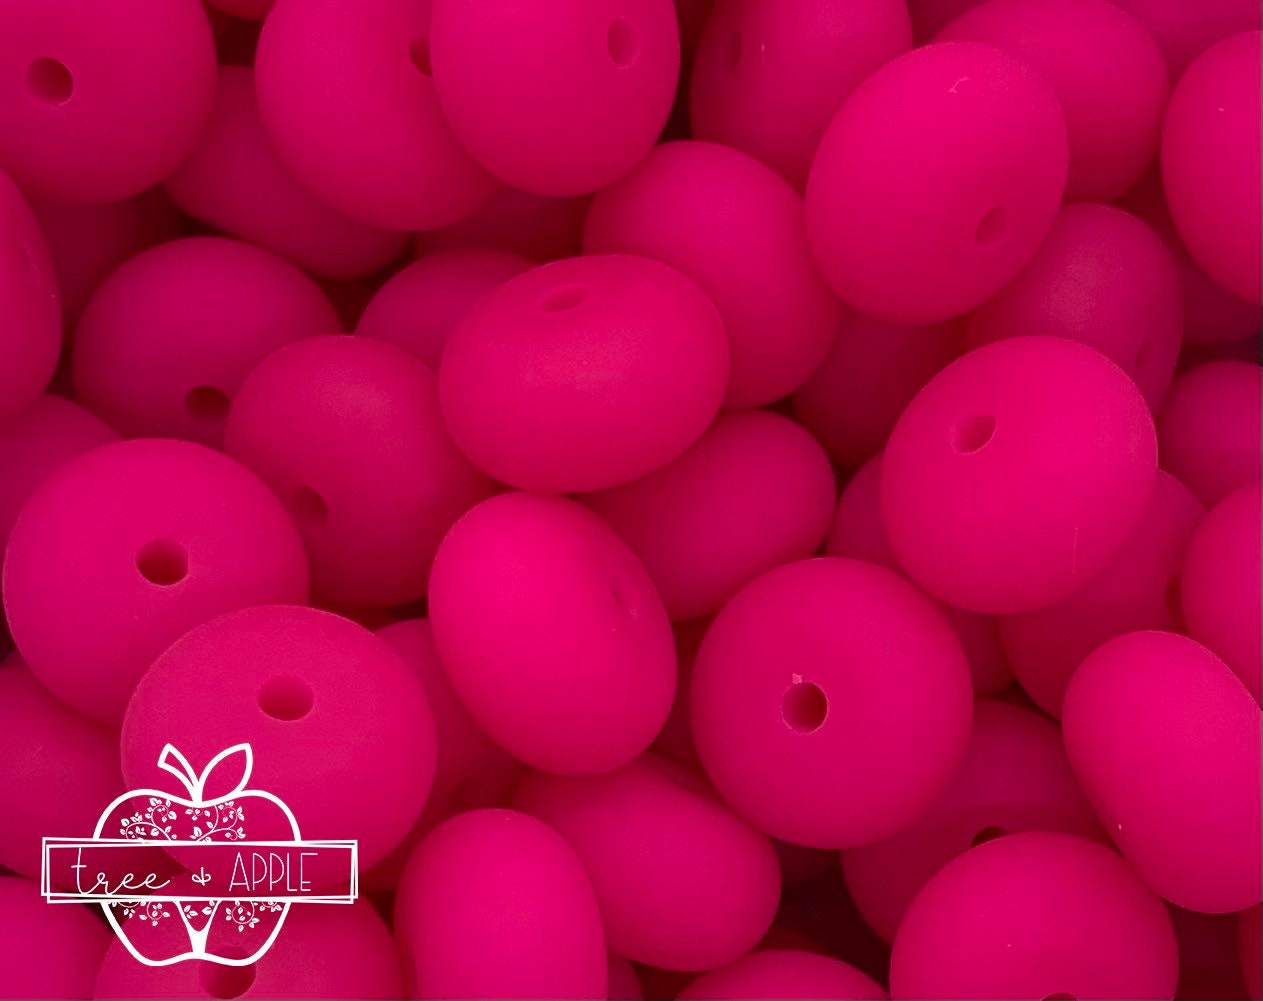 14mm ABACUS Hot Pink Silicone Beads